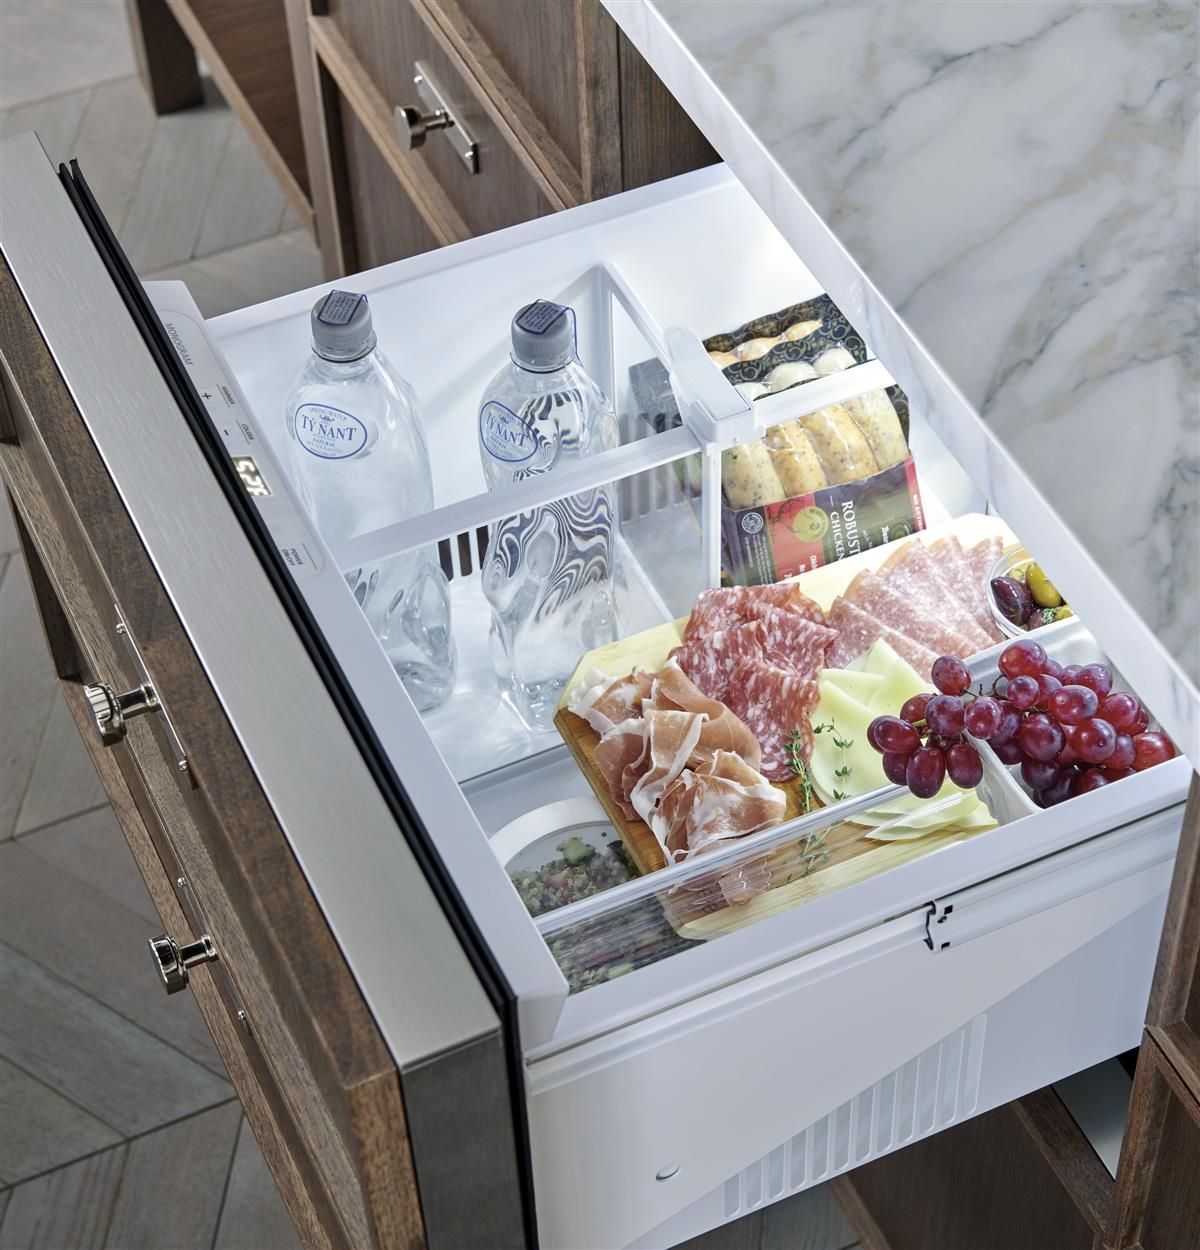 Full-extension Slide-out Refrigerated Drawers